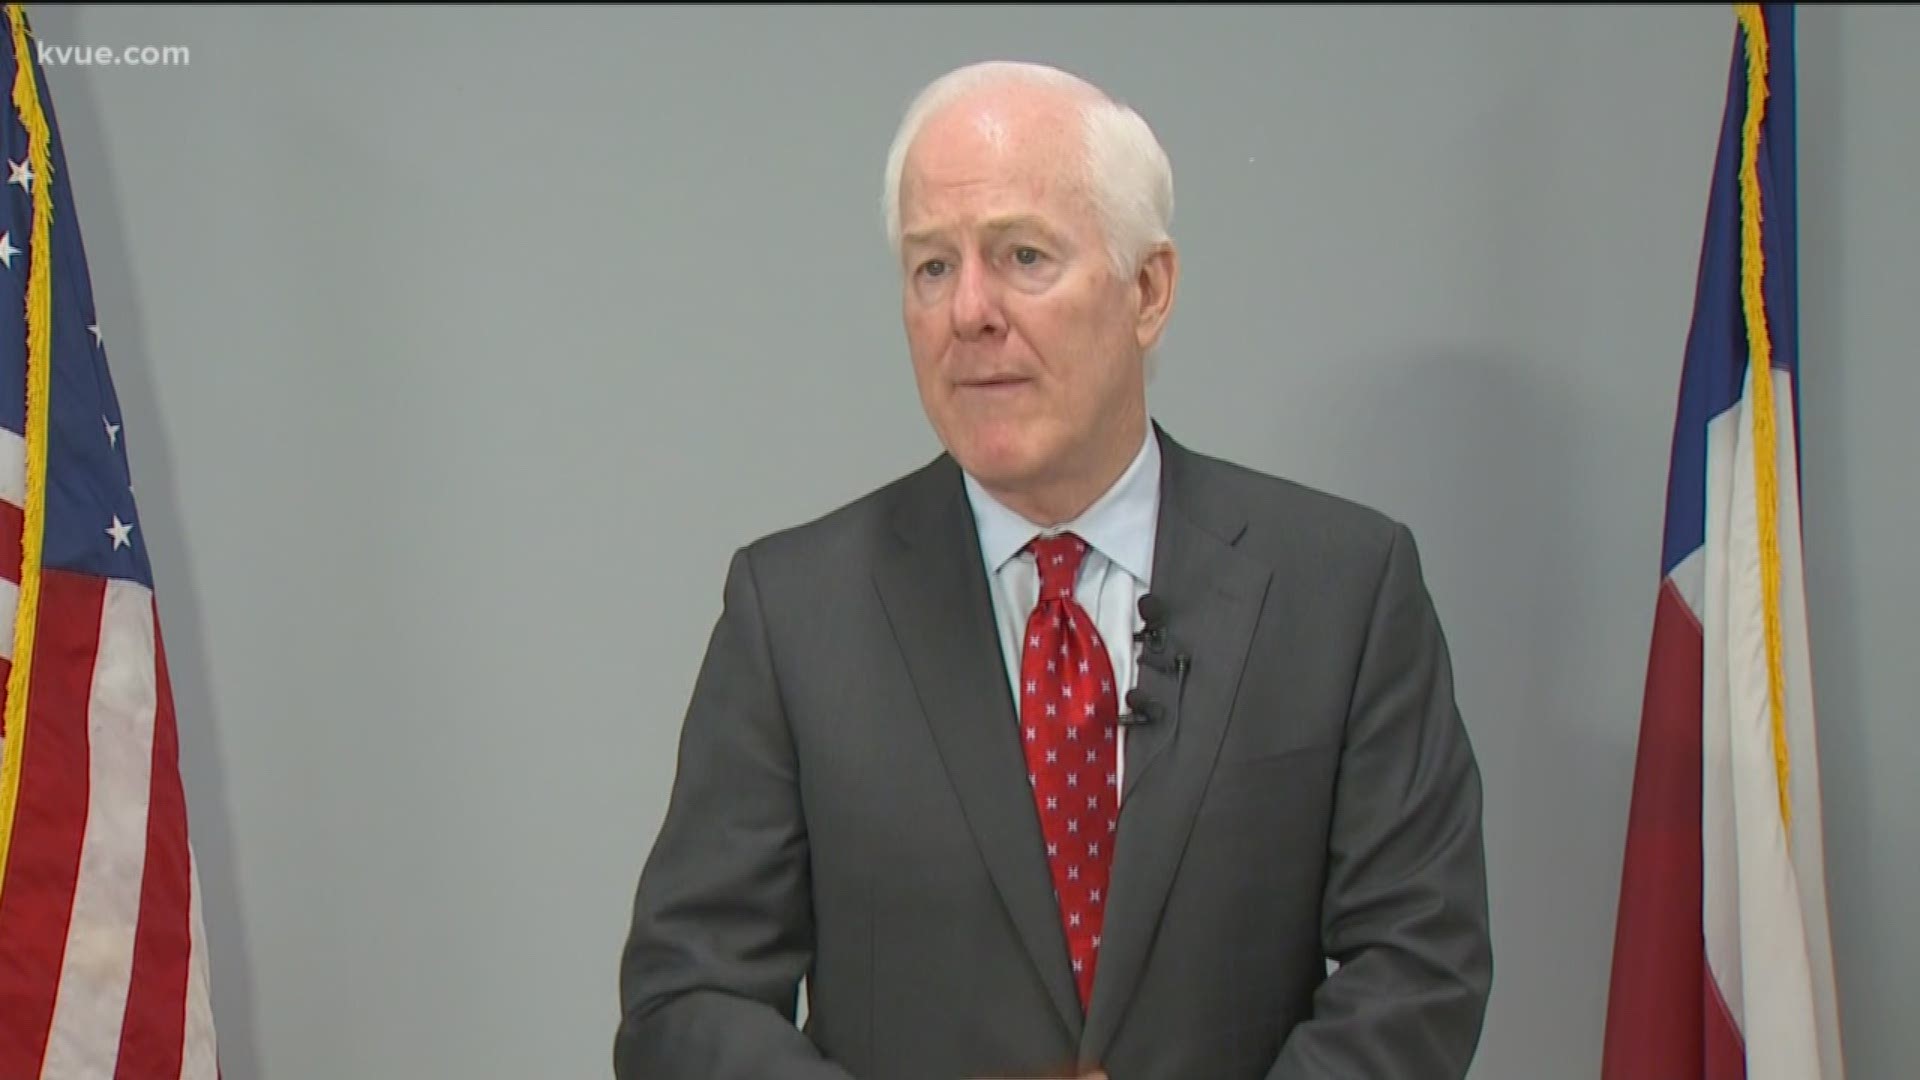 Sen. Cornyn has four Republican challengers in the Texas primary.